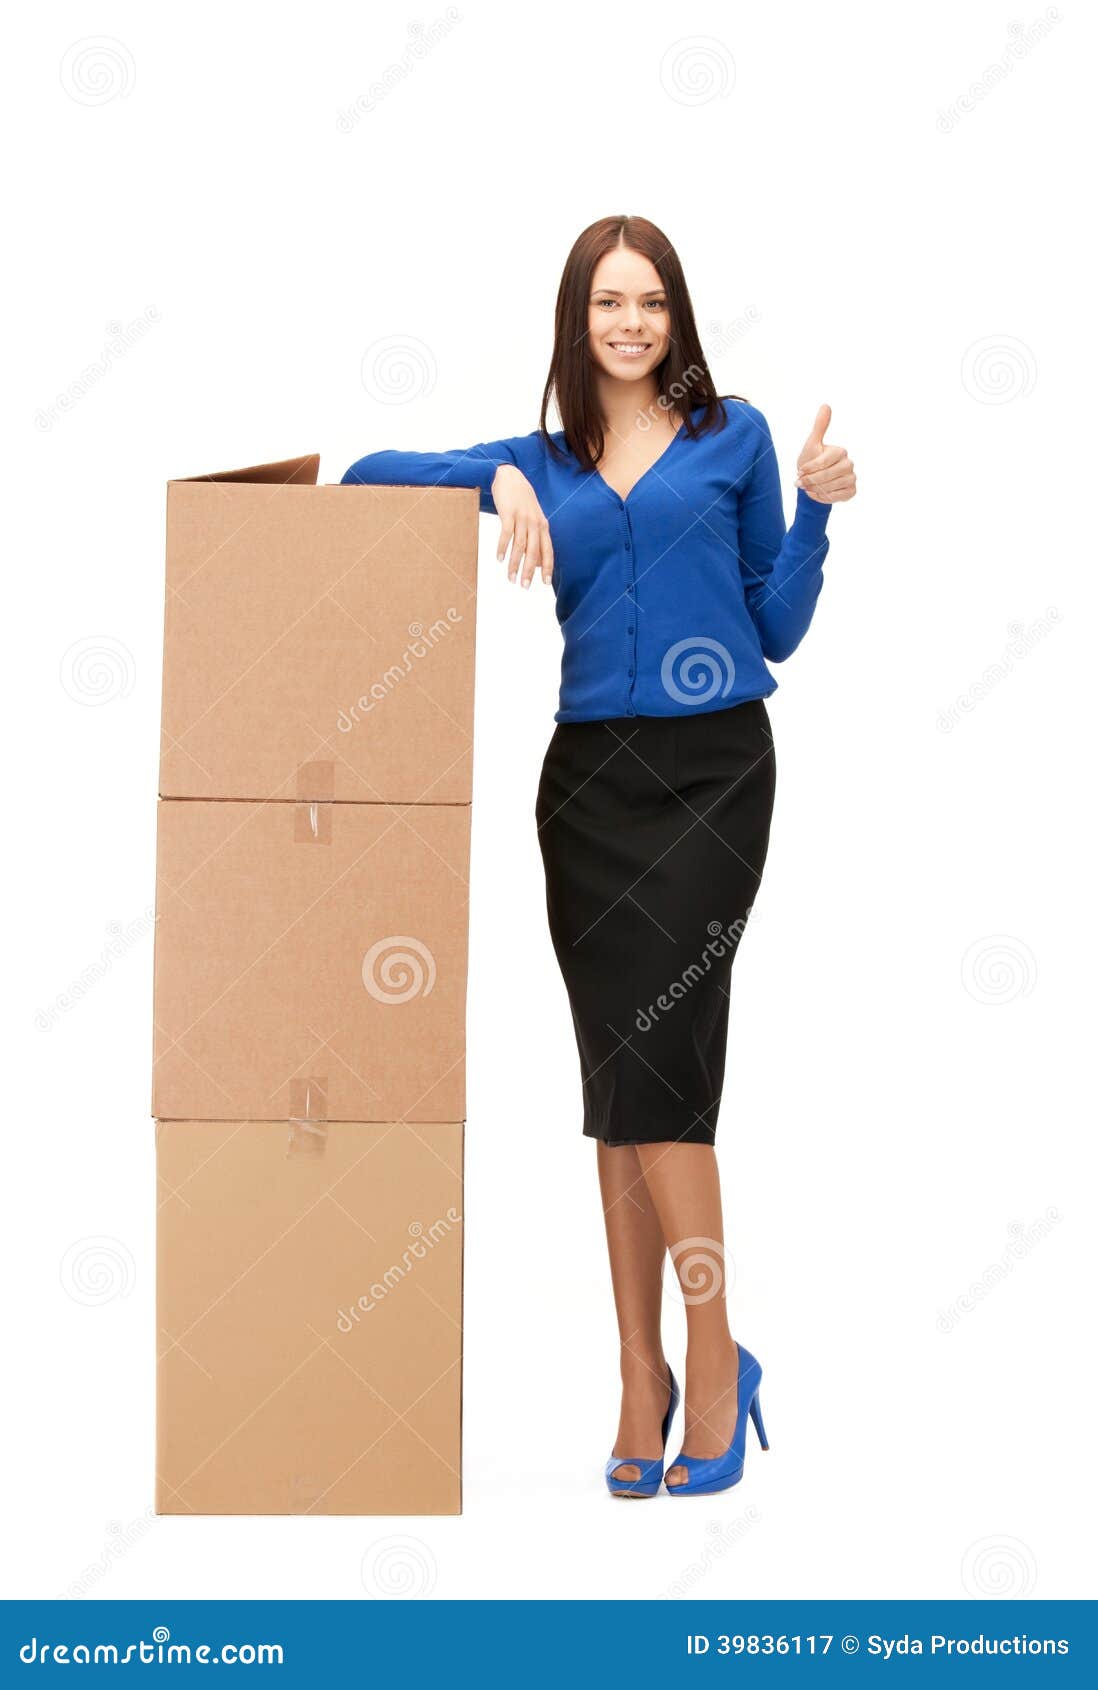 Attractive Businesswoman With Big Boxes Stock Image Image Of Female Delivery 39836117